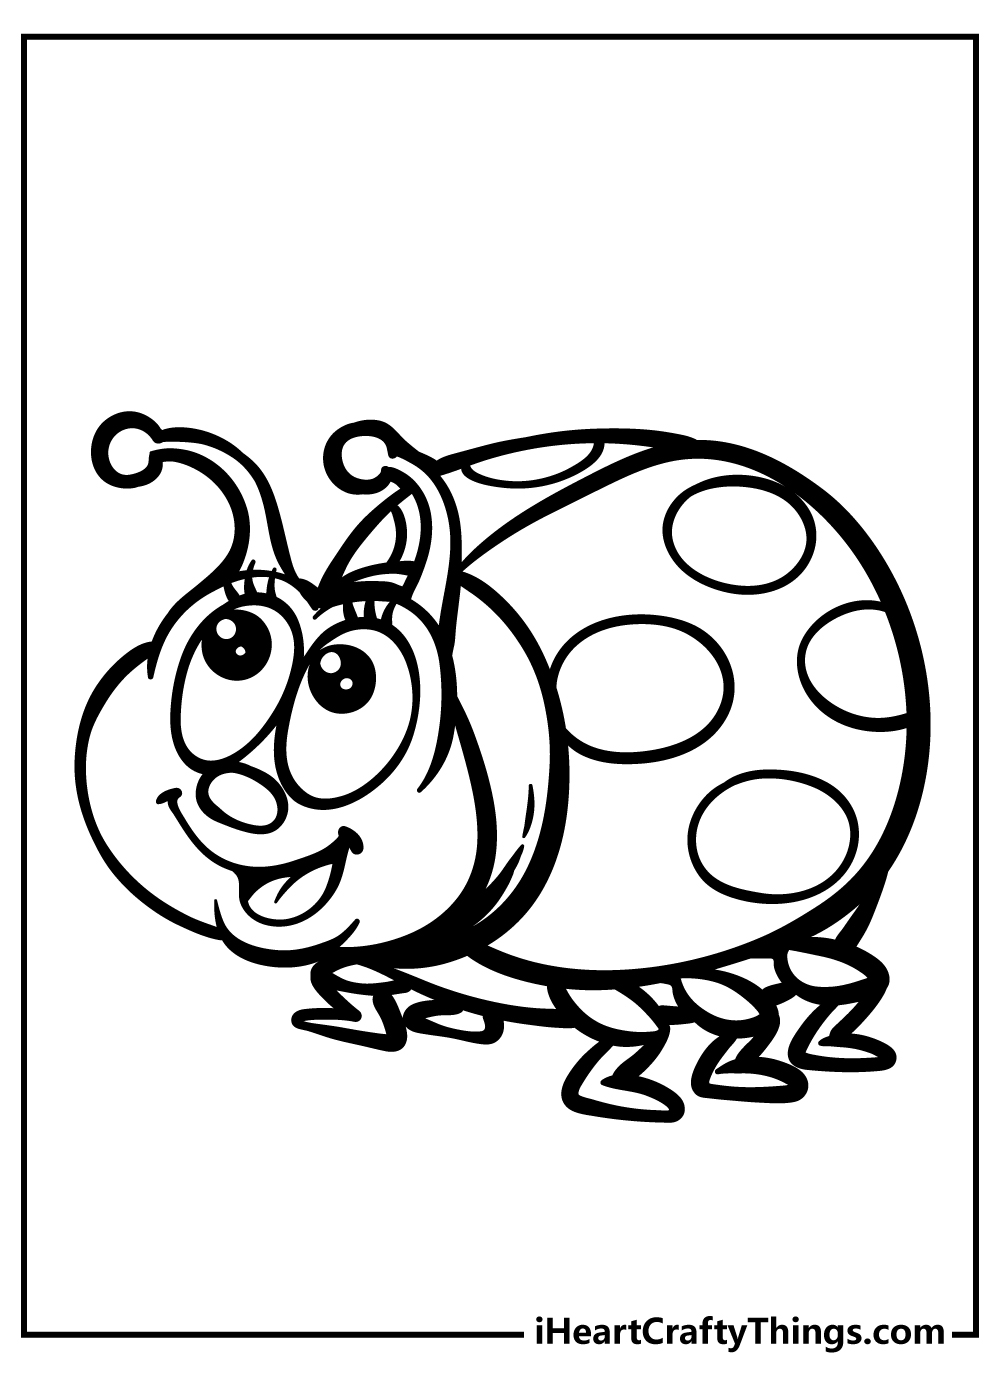 Ladybug coloring pages free printables